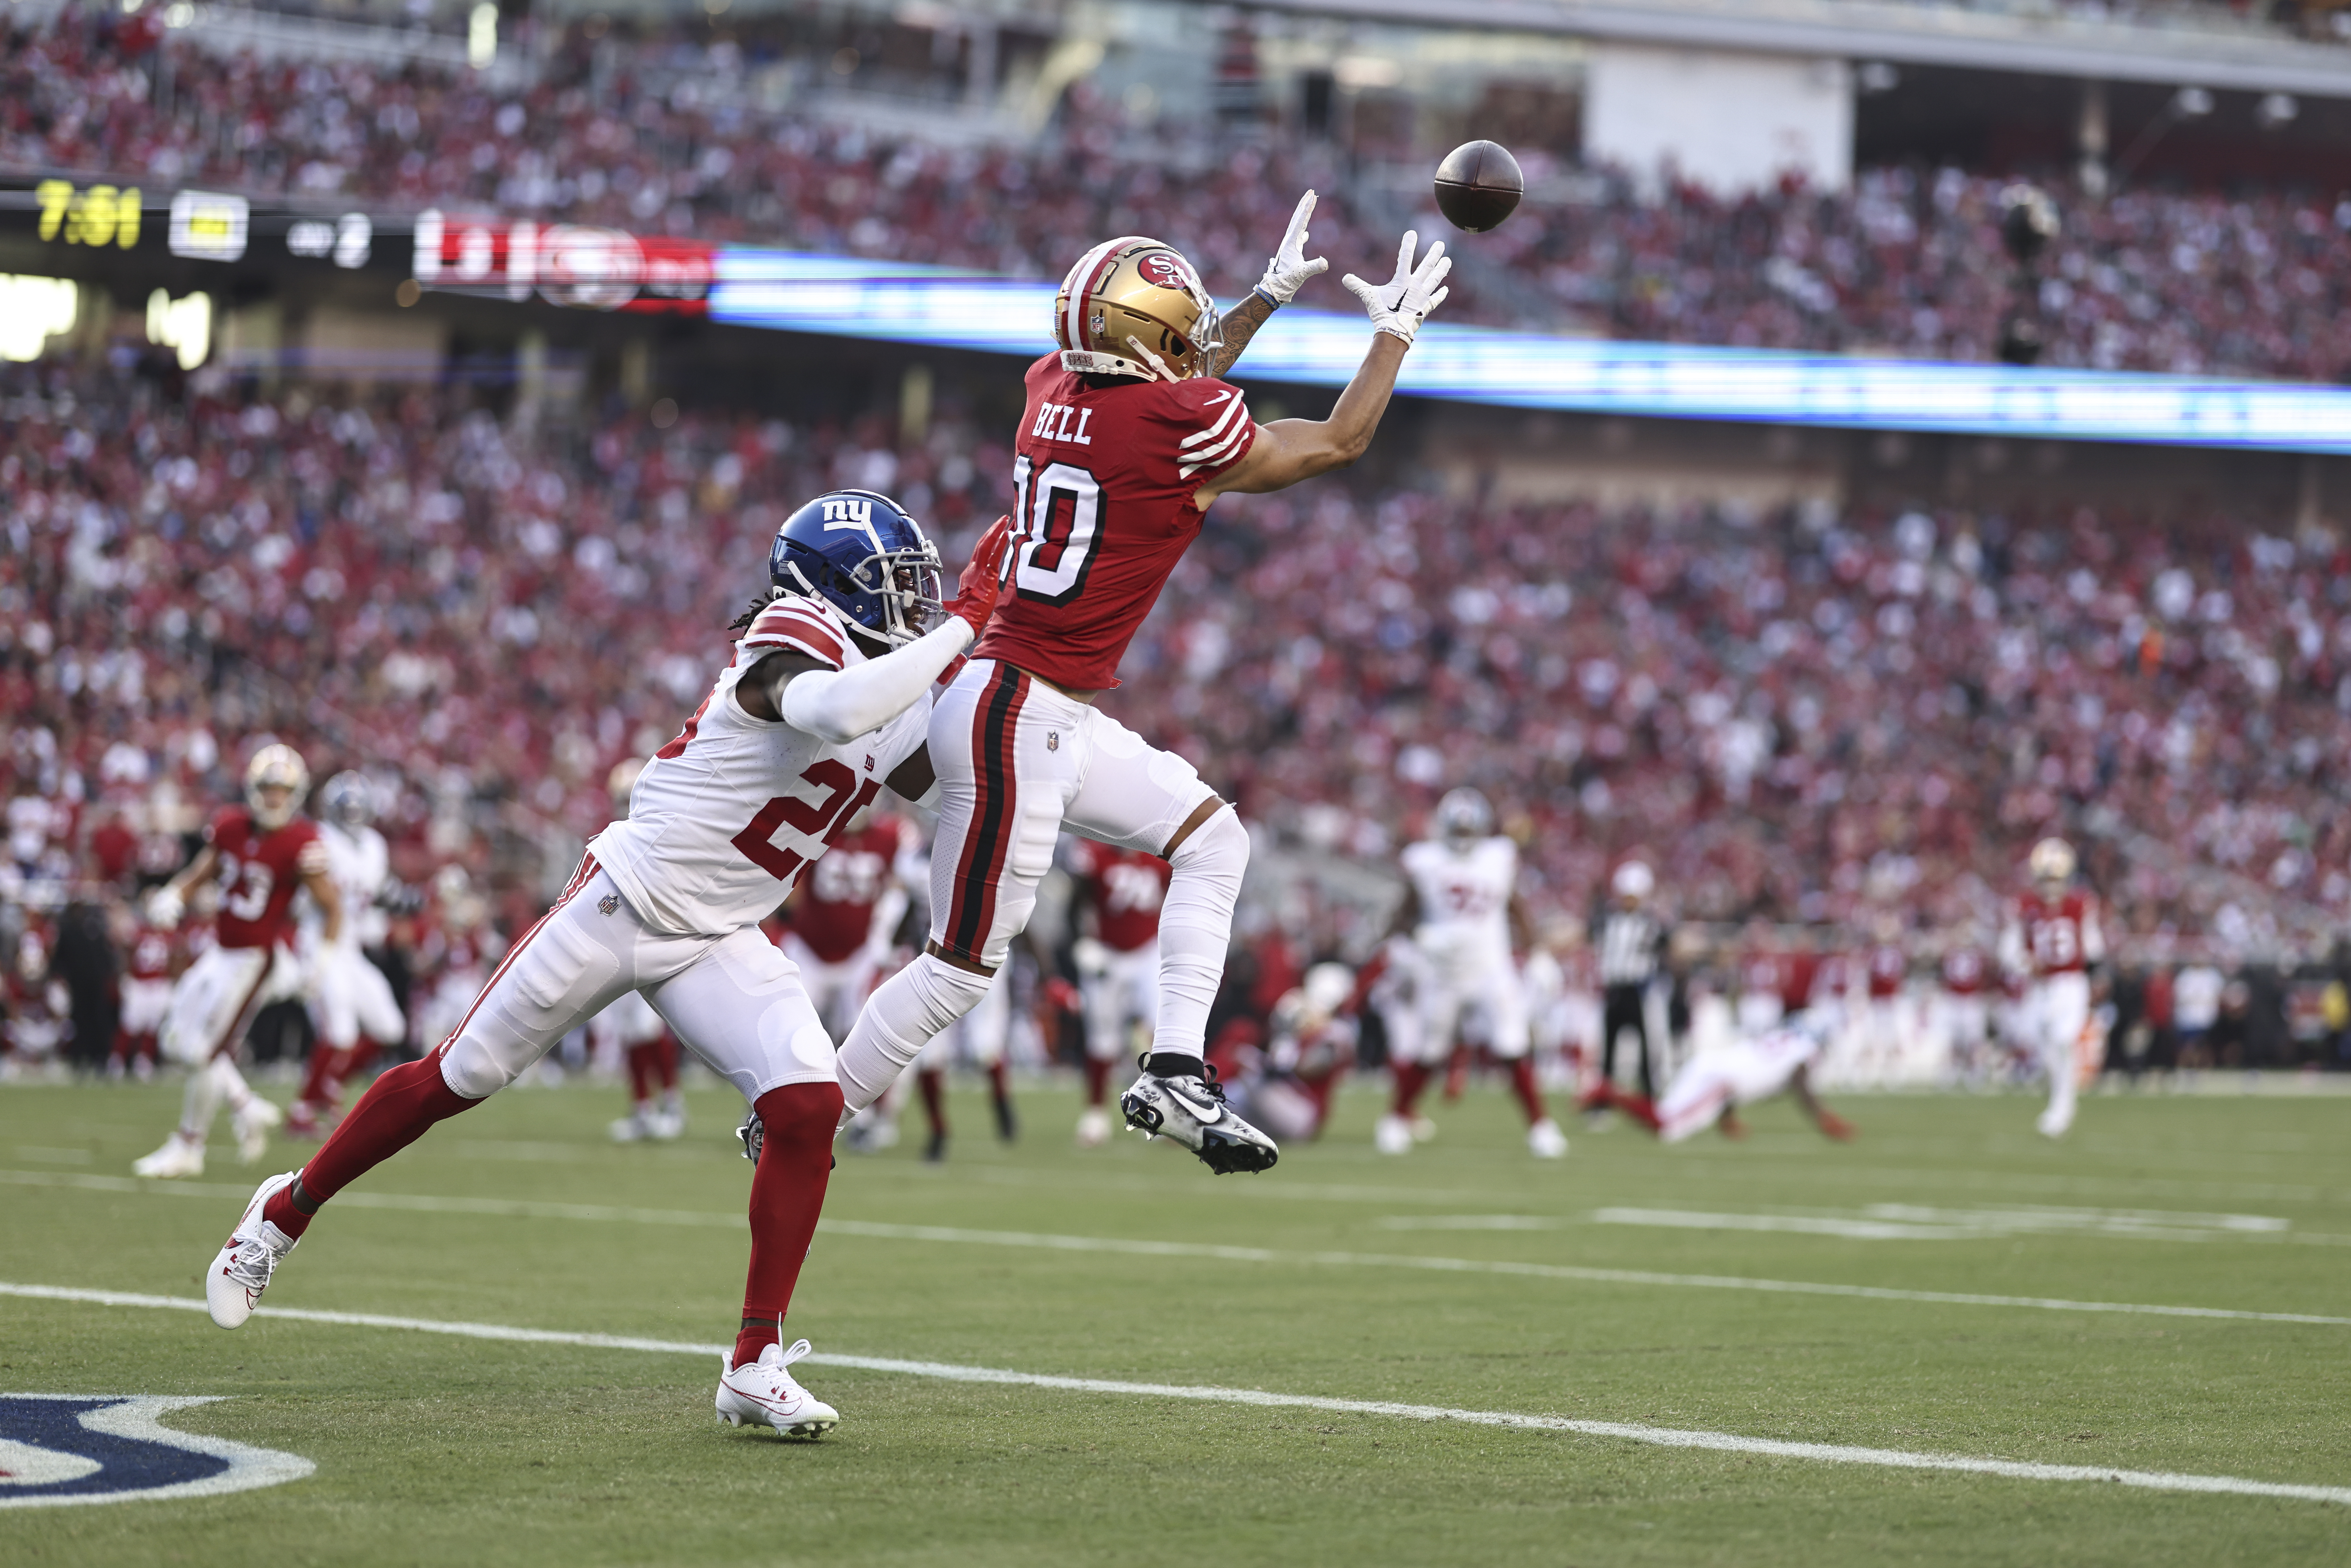 Ronnie Bell #10 of the San Francisco 49ers completes a pass for a touchdown against Deonte Banks #25 of the New York Giants during an NFL football game between the San Francisco 49ers and the New York Giants at Levi’s Stadium on September 21, 2023 in Santa Clara, California.